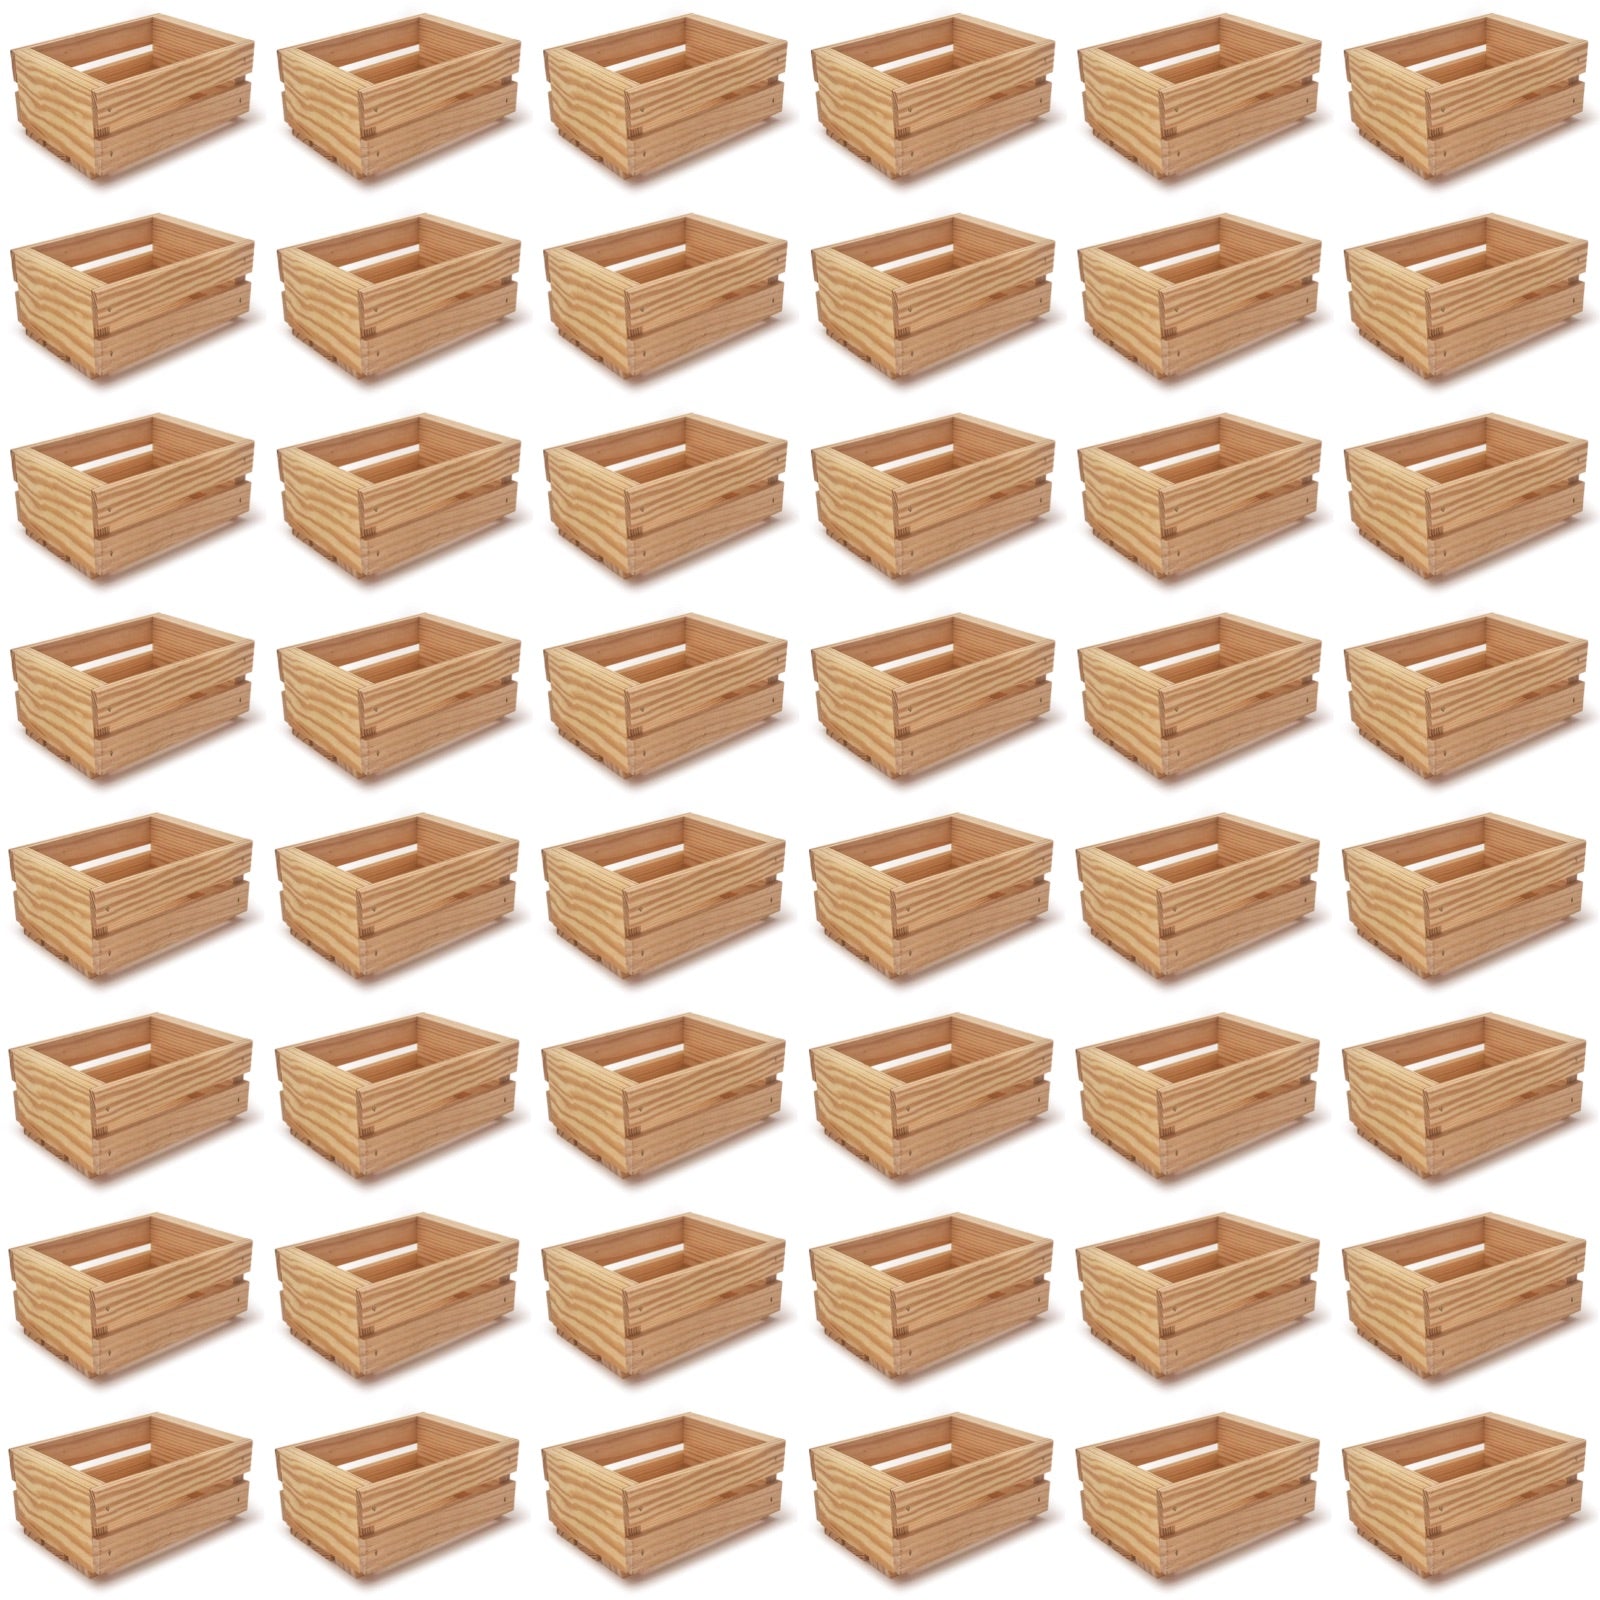 48 Small wooden crates 7.125x5.5x3.5